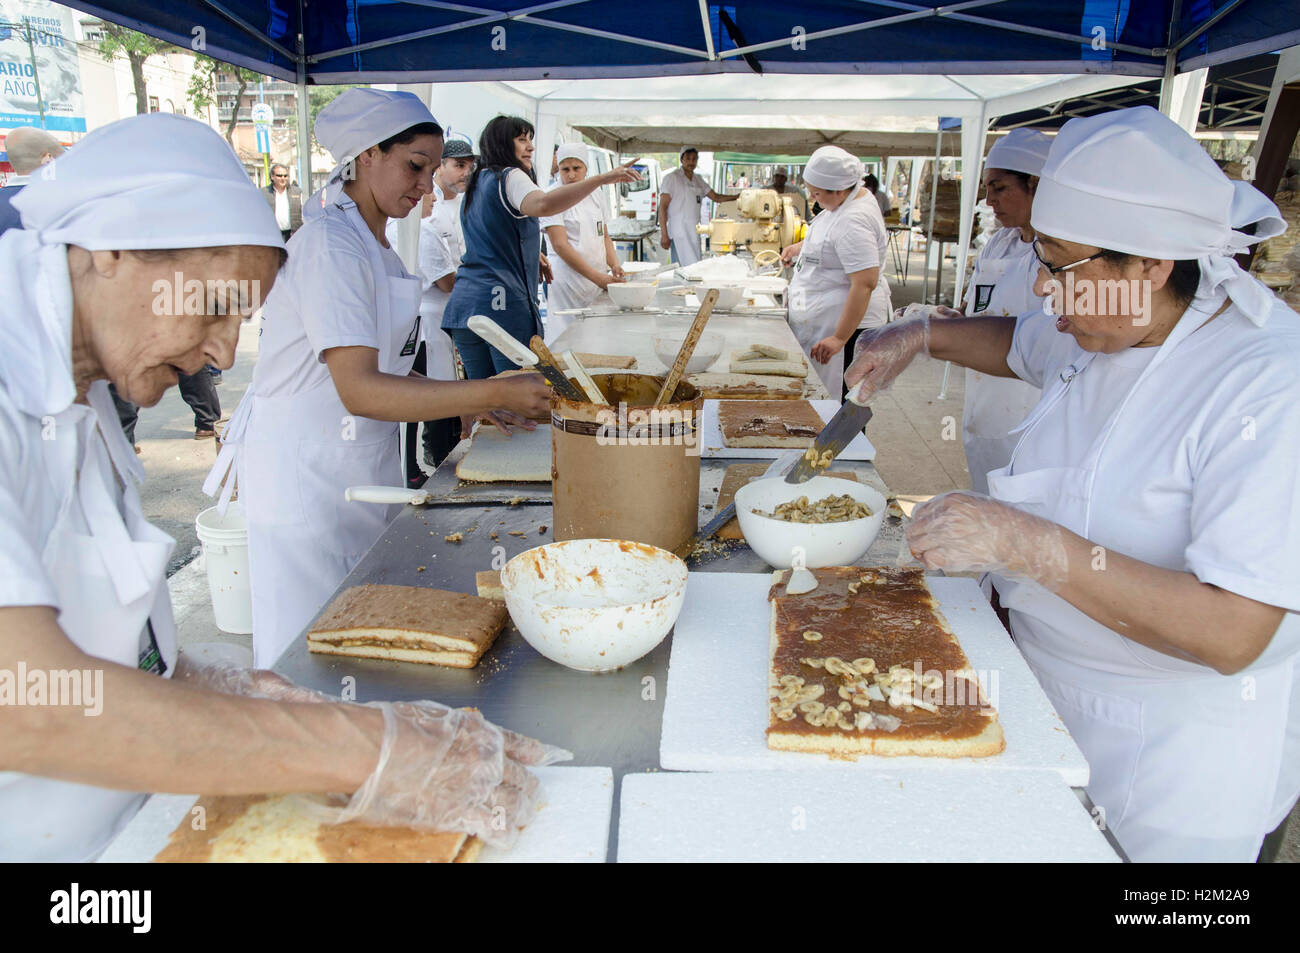 Tucuman, Argentina. 29th Sep, 2016. Bakers prepare a 750-meter-long fruit cake, as part of the commemoration of the 331st anniversary of the city's founding, in San Miguel de Tucuman, Tucuman province, Argentina, on Sept. 29, 2016. Over 60 bakers join hands to make the cake. © Julio Pantoja/TELAM/Xinhua/Alamy Live News Stock Photo